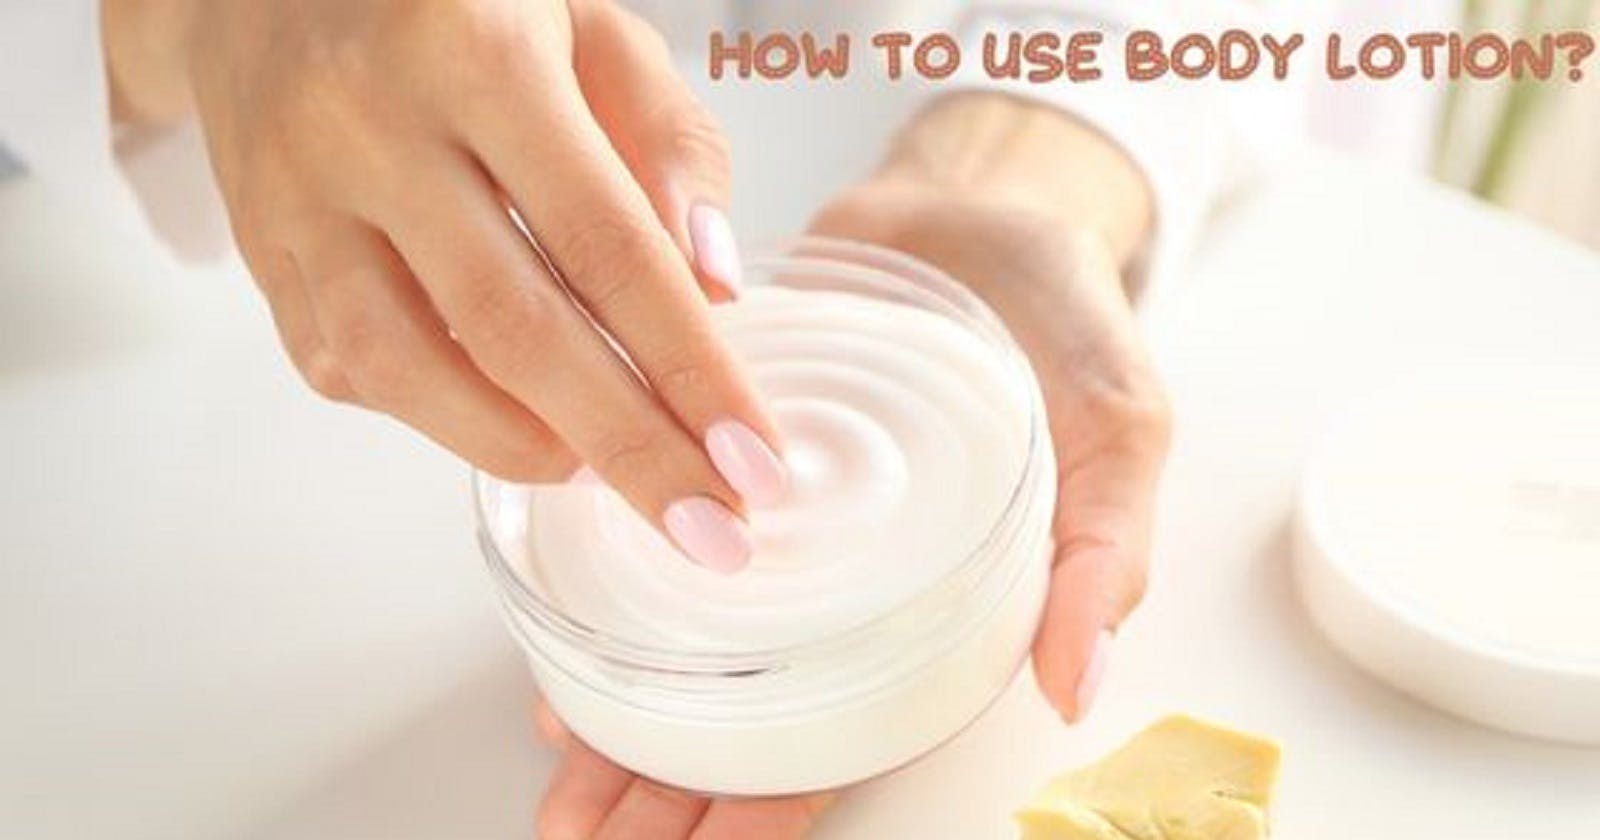 How to Use Body Lotion?